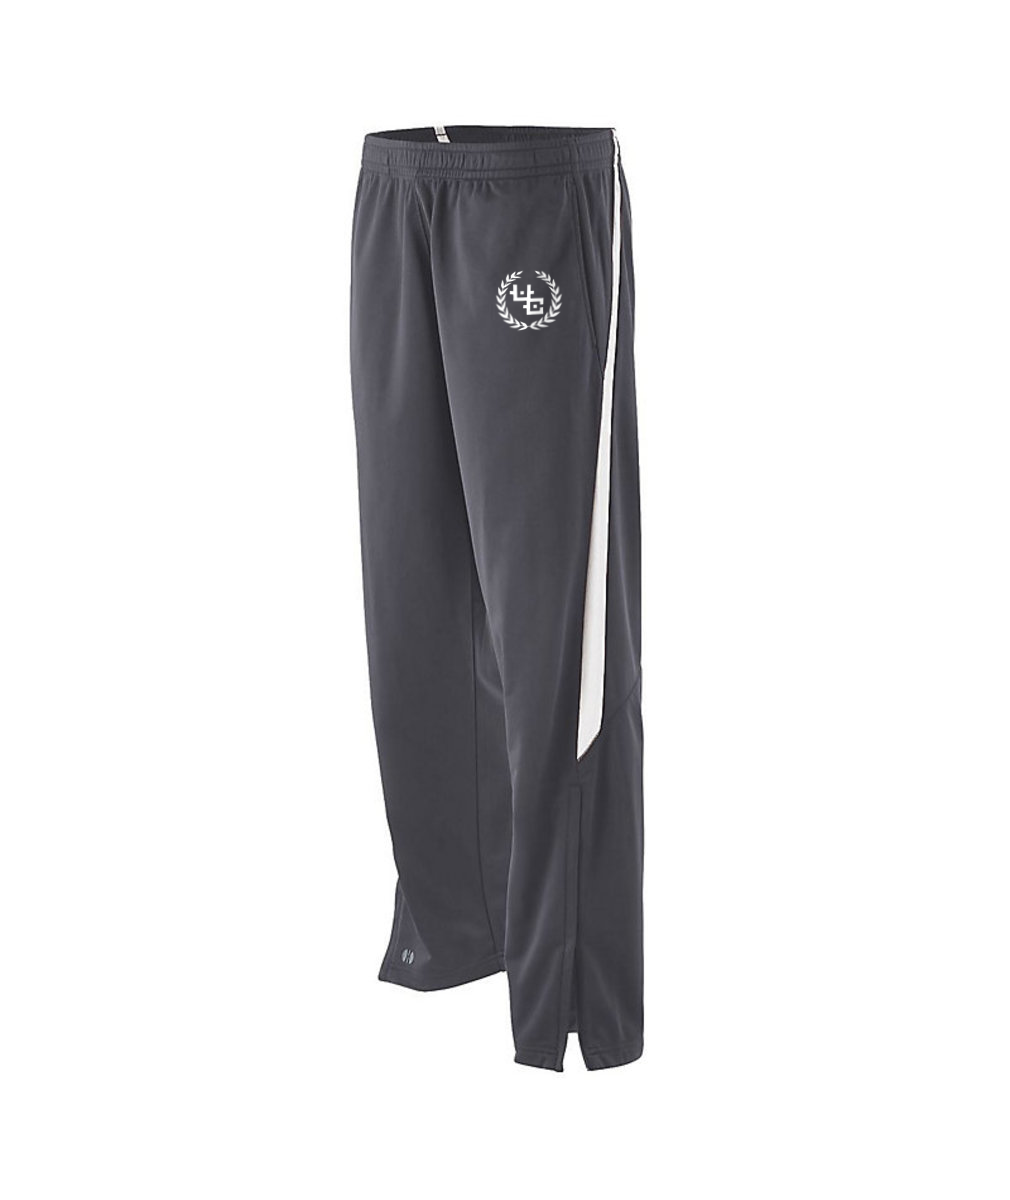 UC Reef embroidered Men's Knit Pants